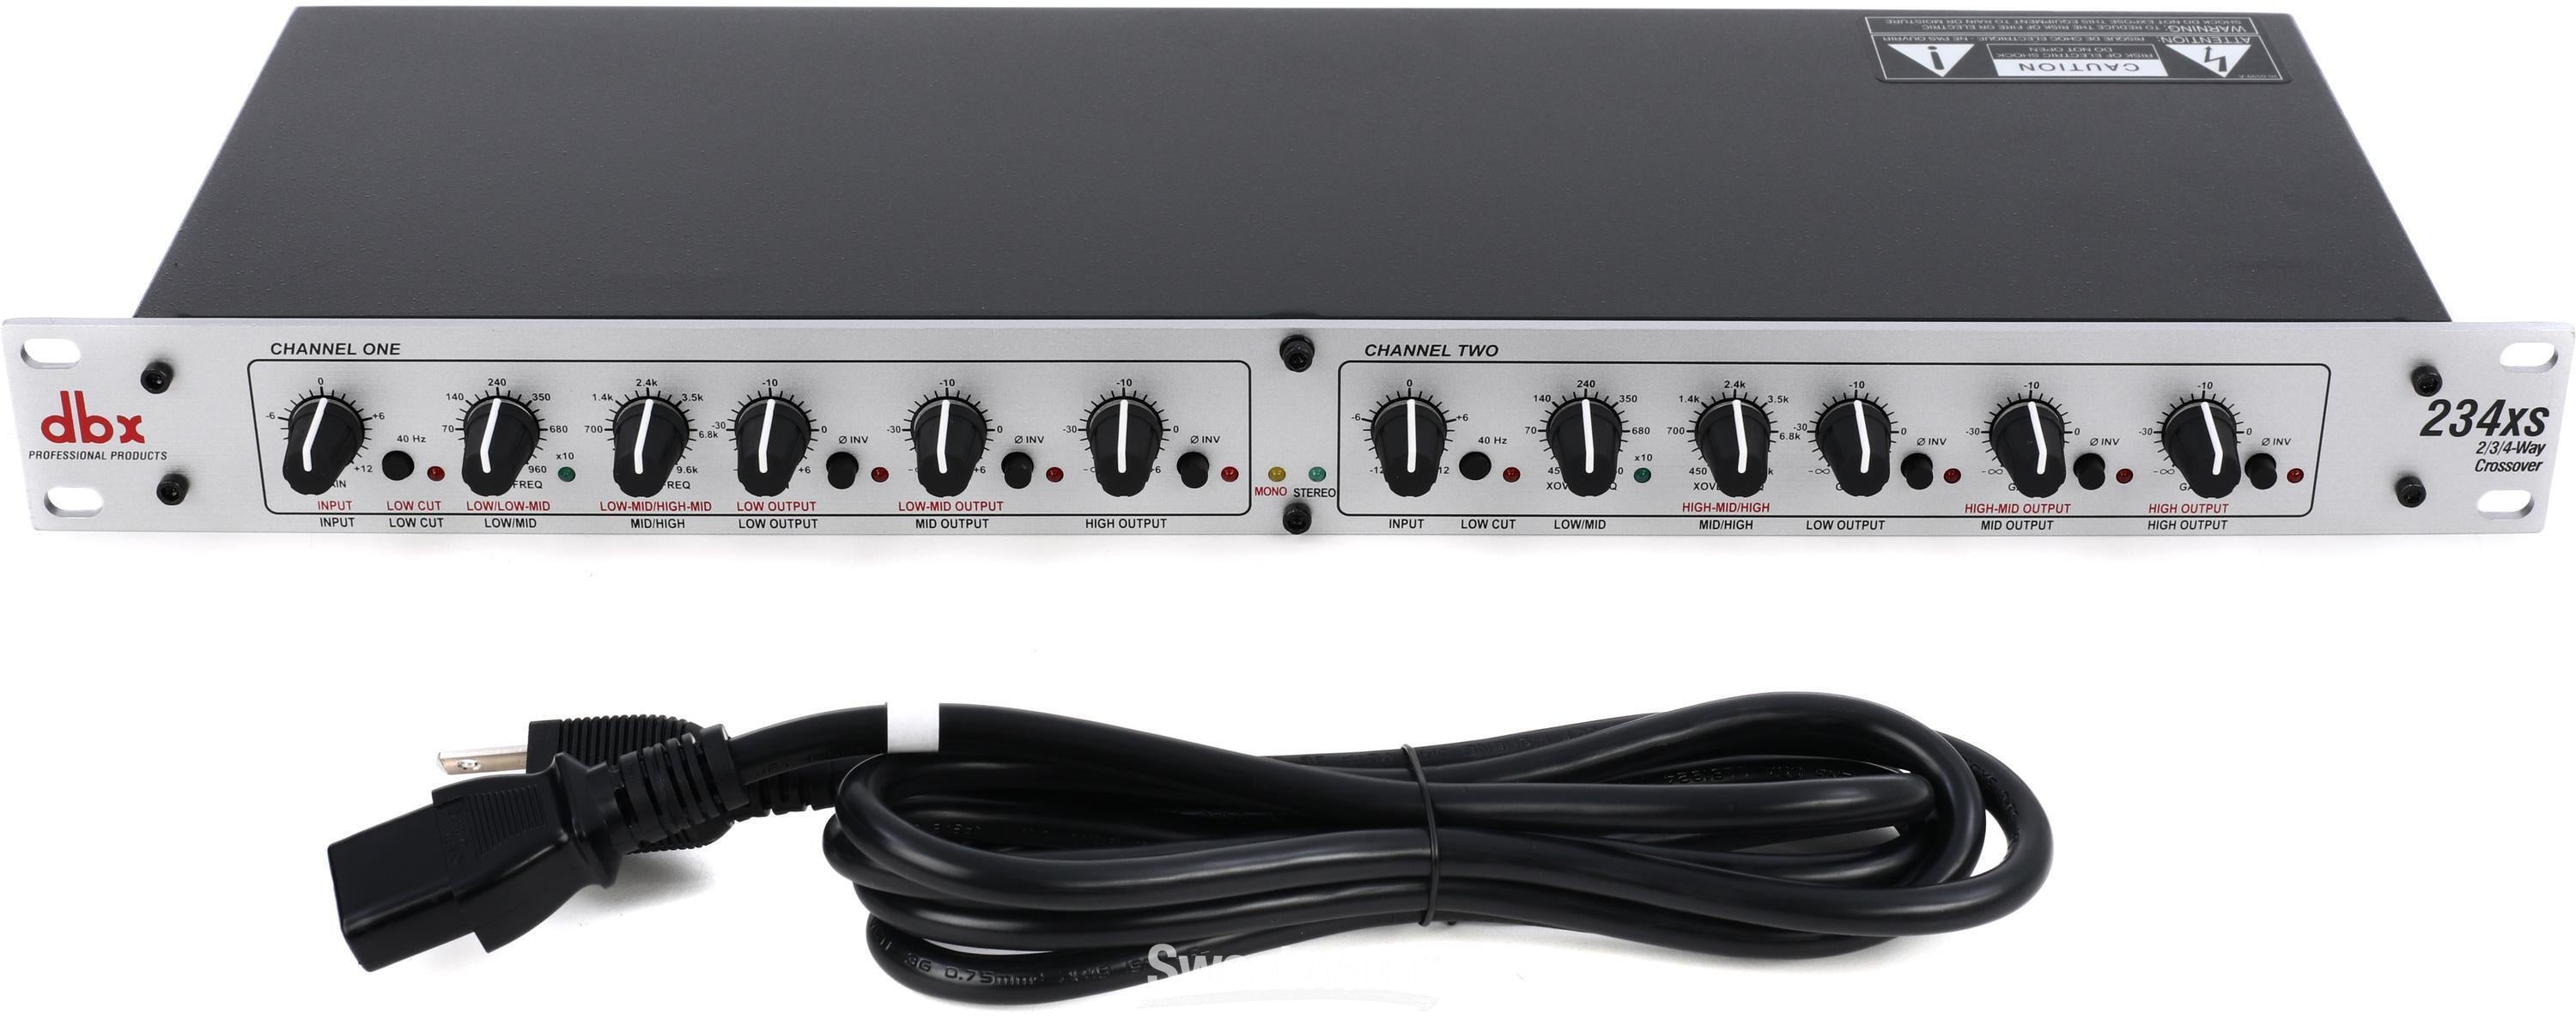 2-/3-way　Crossover　dbx　234xs　Mono　Stereo,　4-way　Sweetwater